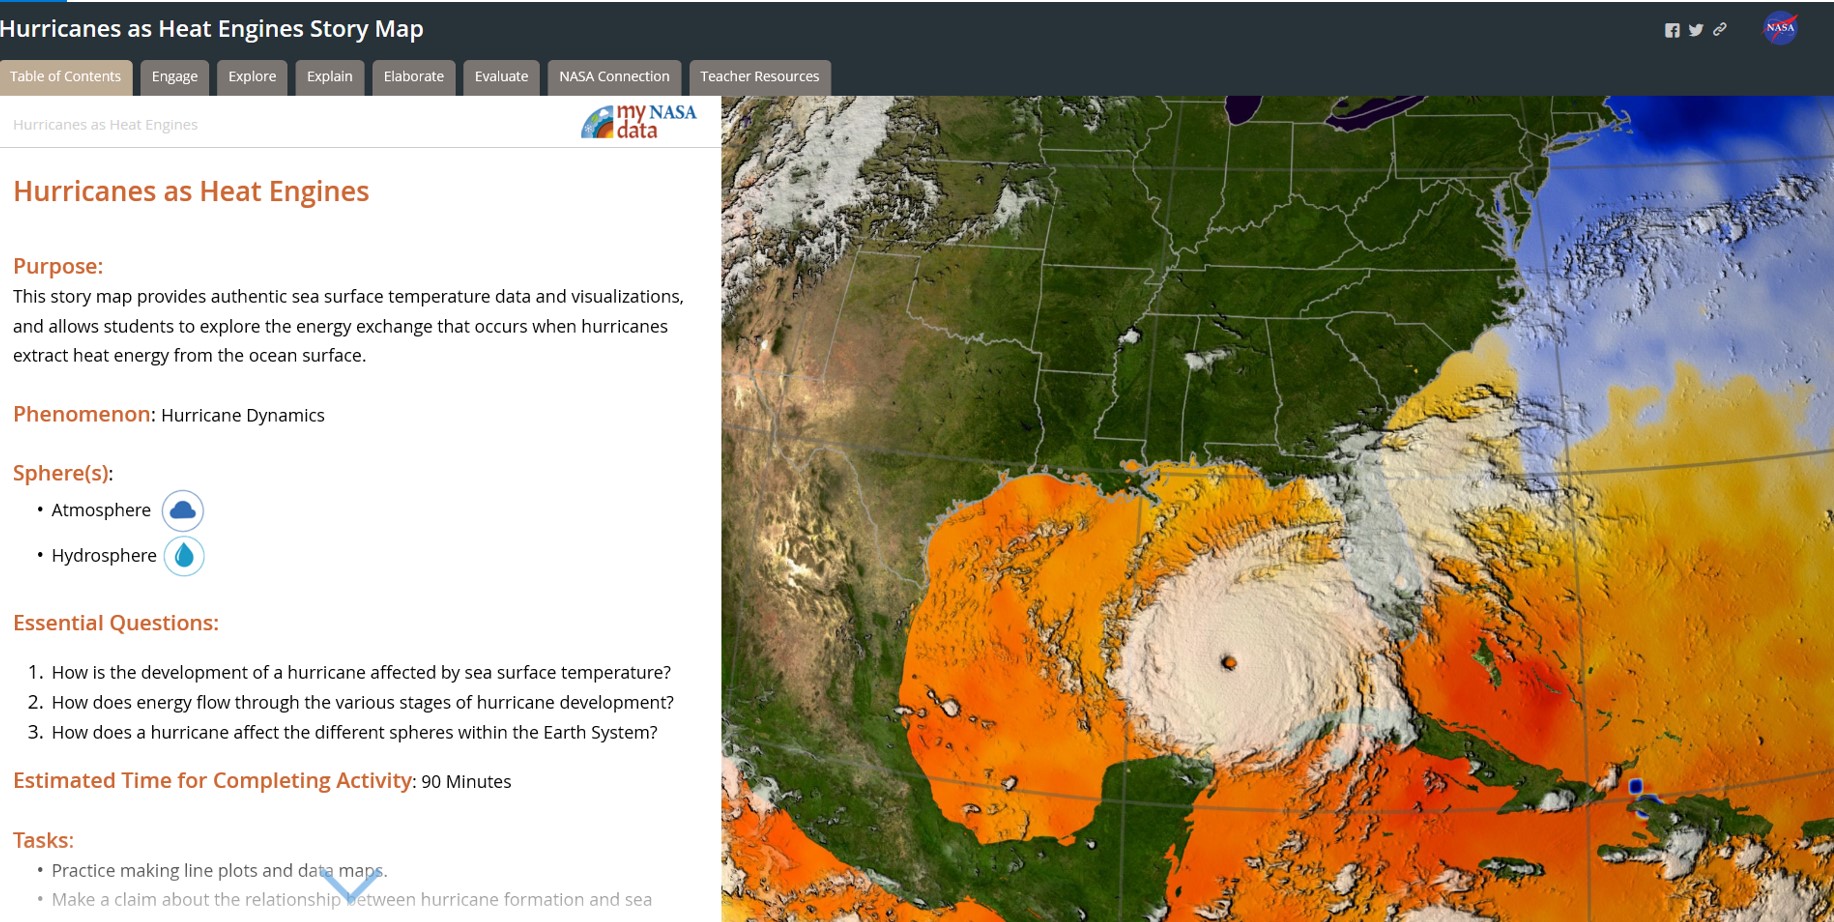 Hurricanes as Heat Engines Story Map